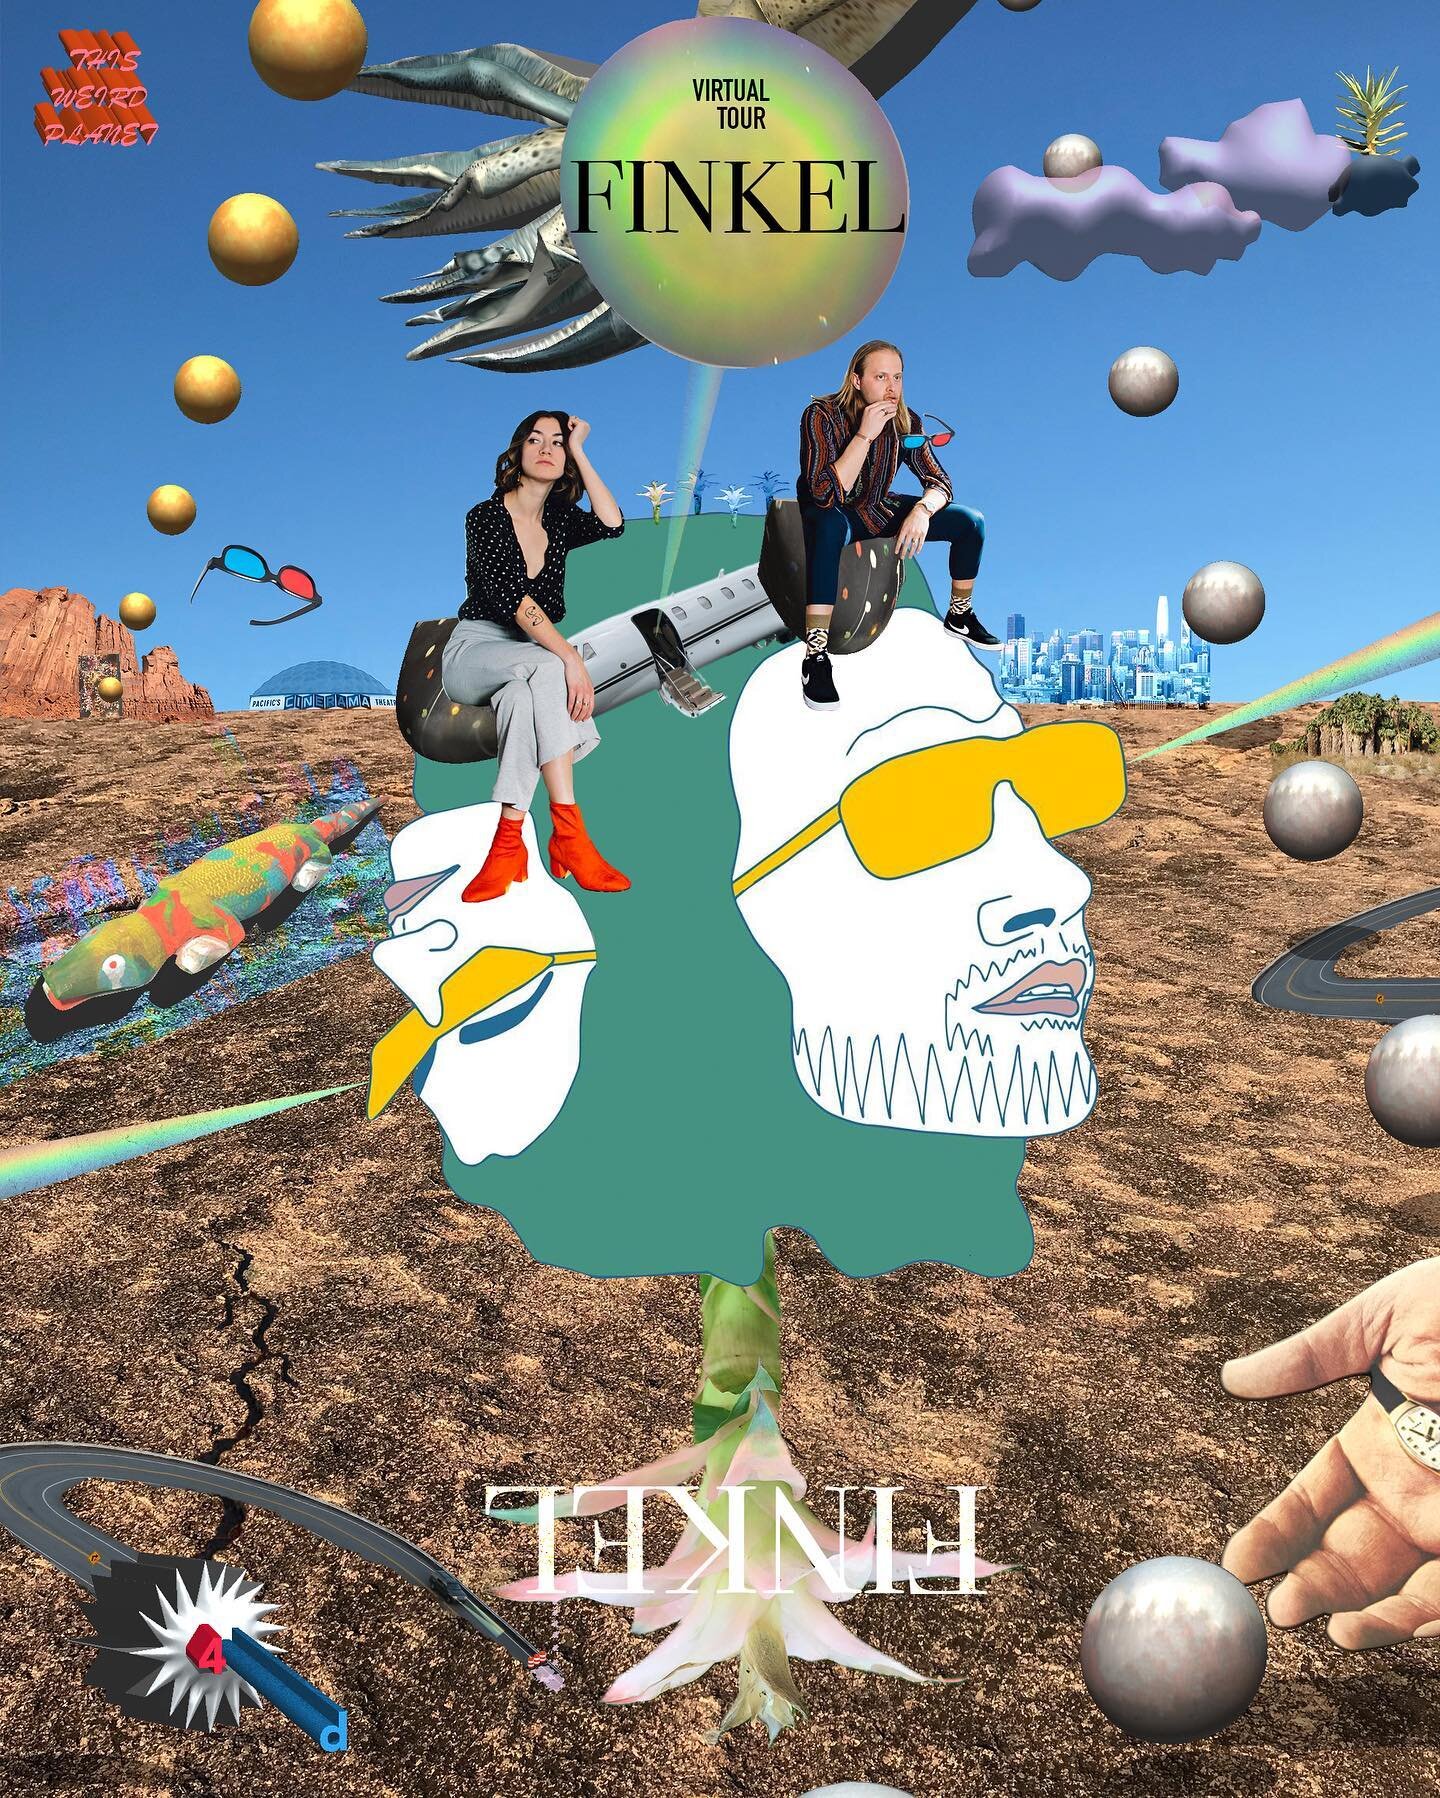 Wanted to share some collage art I made for my friends @finkel_band to support their new music and virtual tour!  Check em out!!! 👏🎵🎶 Also, happy anniversary! 😄

Big thanks to @oliveknut for the artwork, and @ellynjameson for the photo that inspi